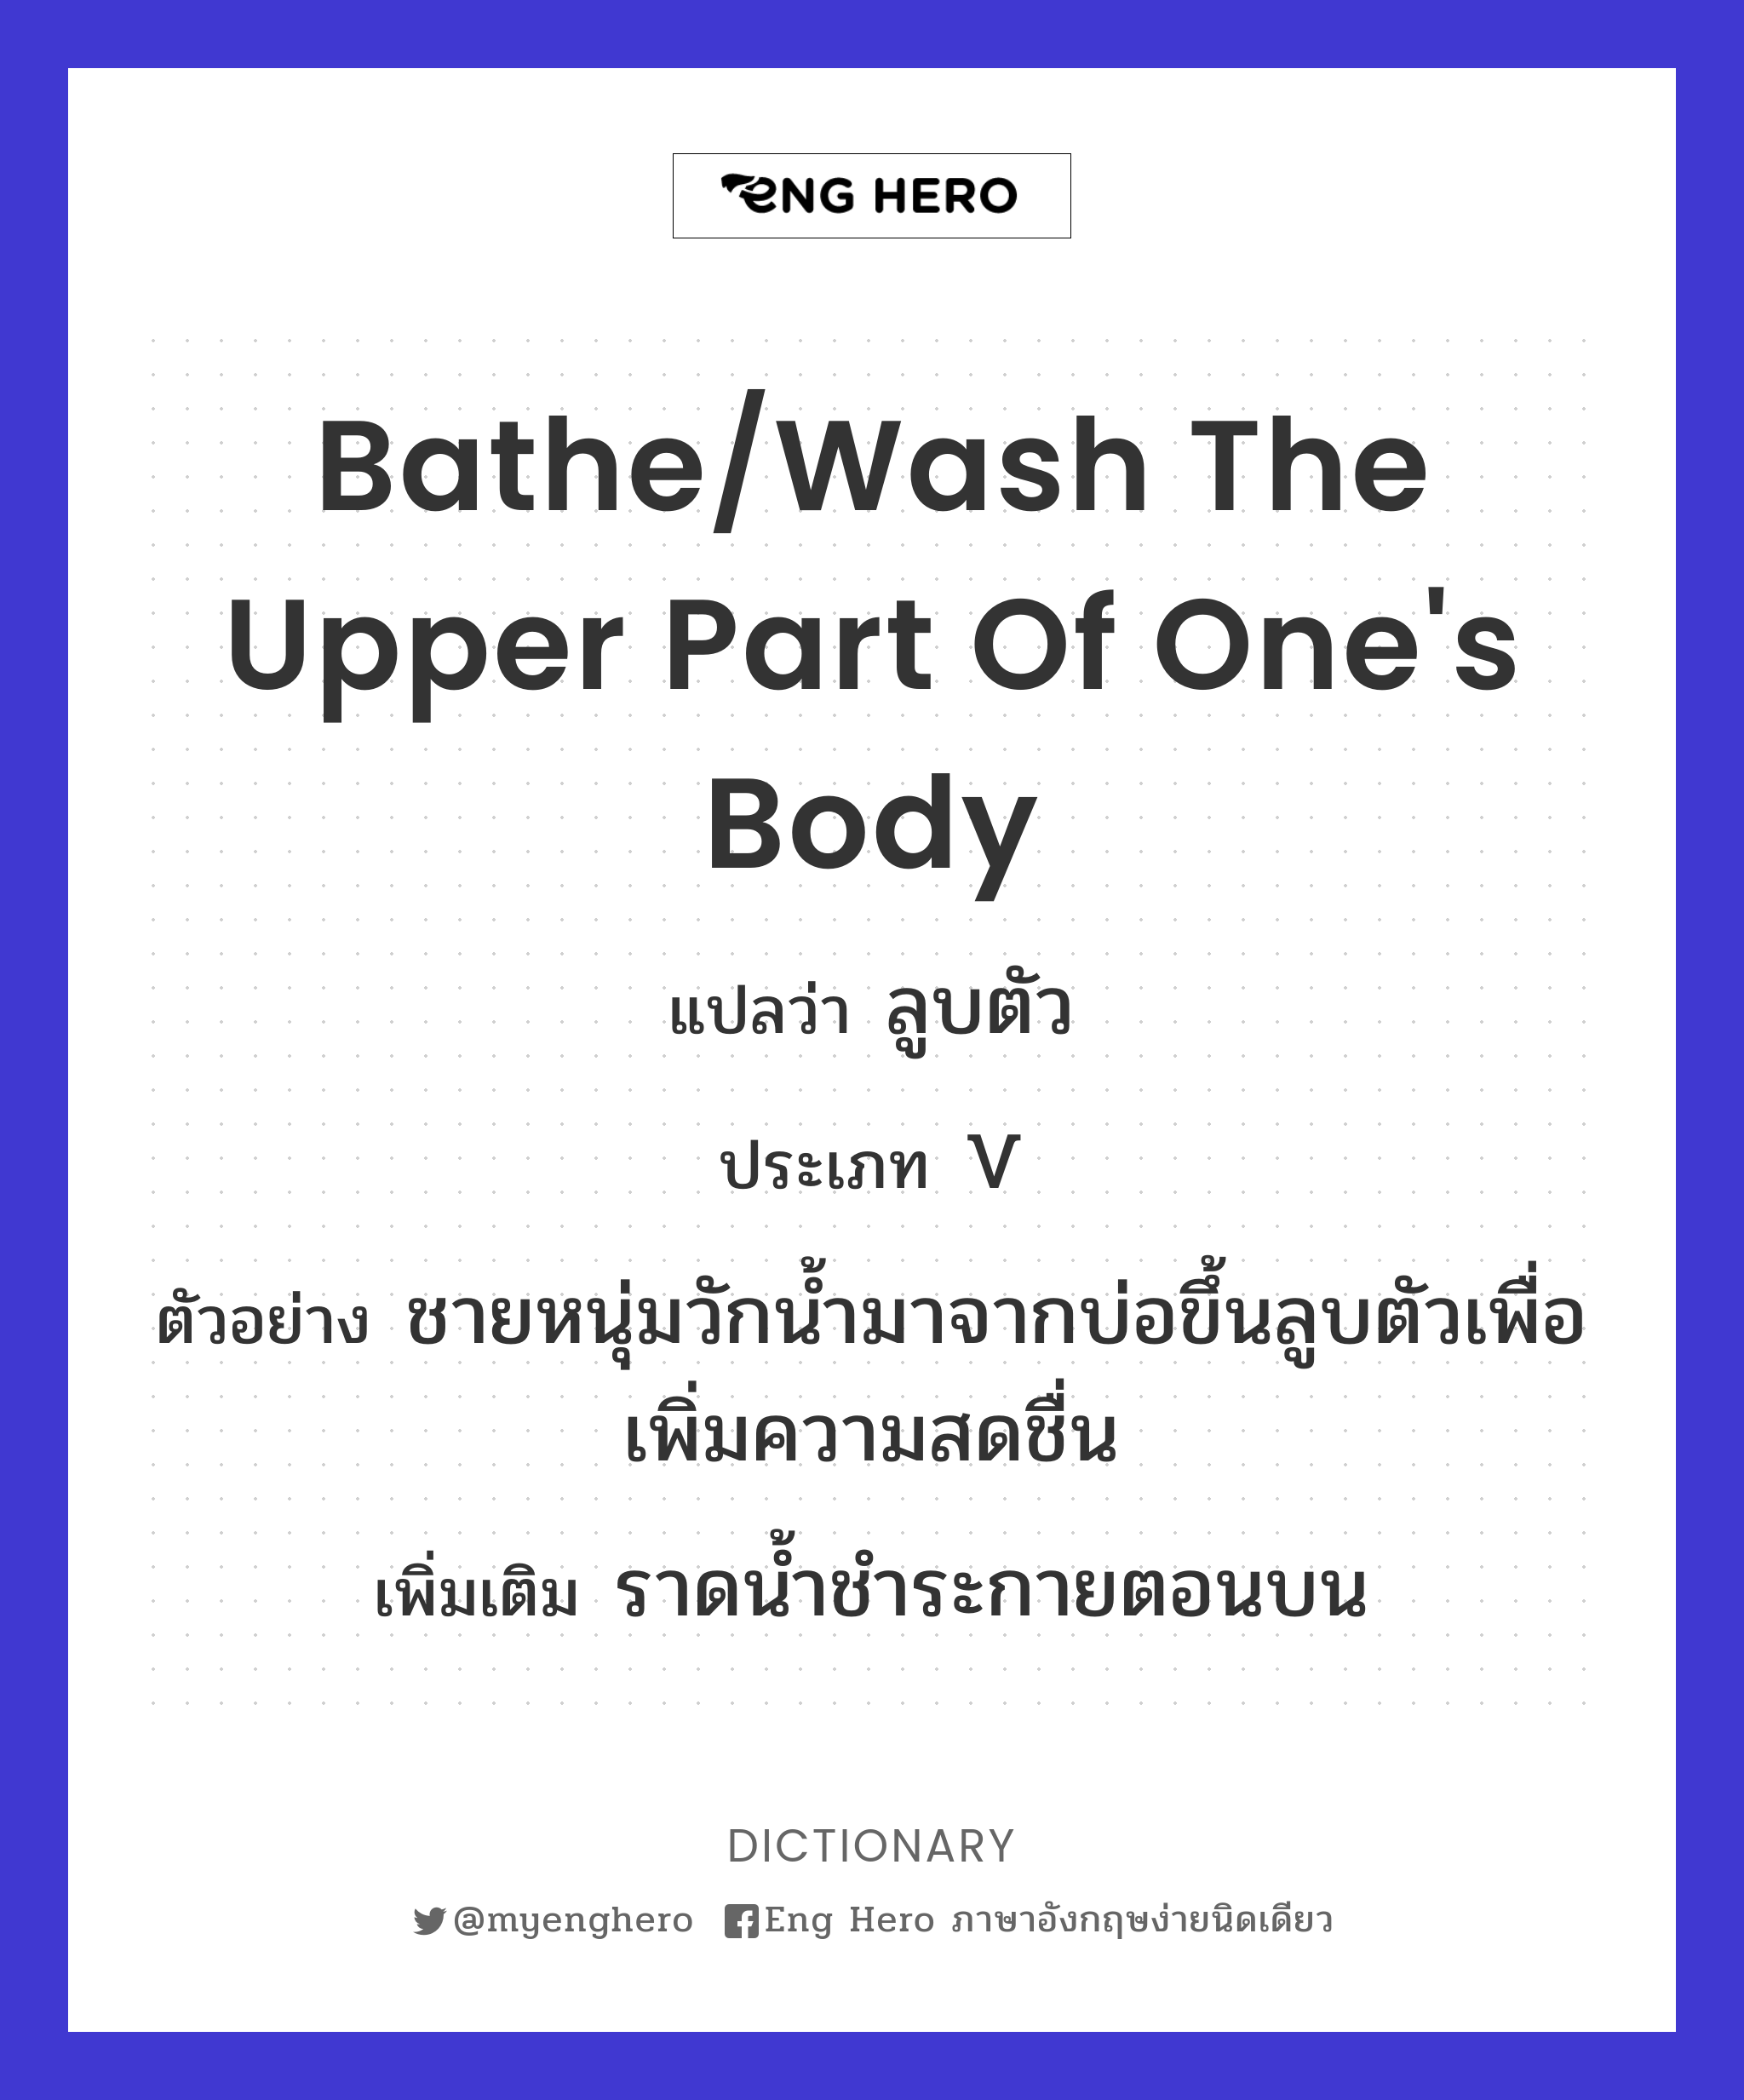 bathe/wash the upper part of one's body